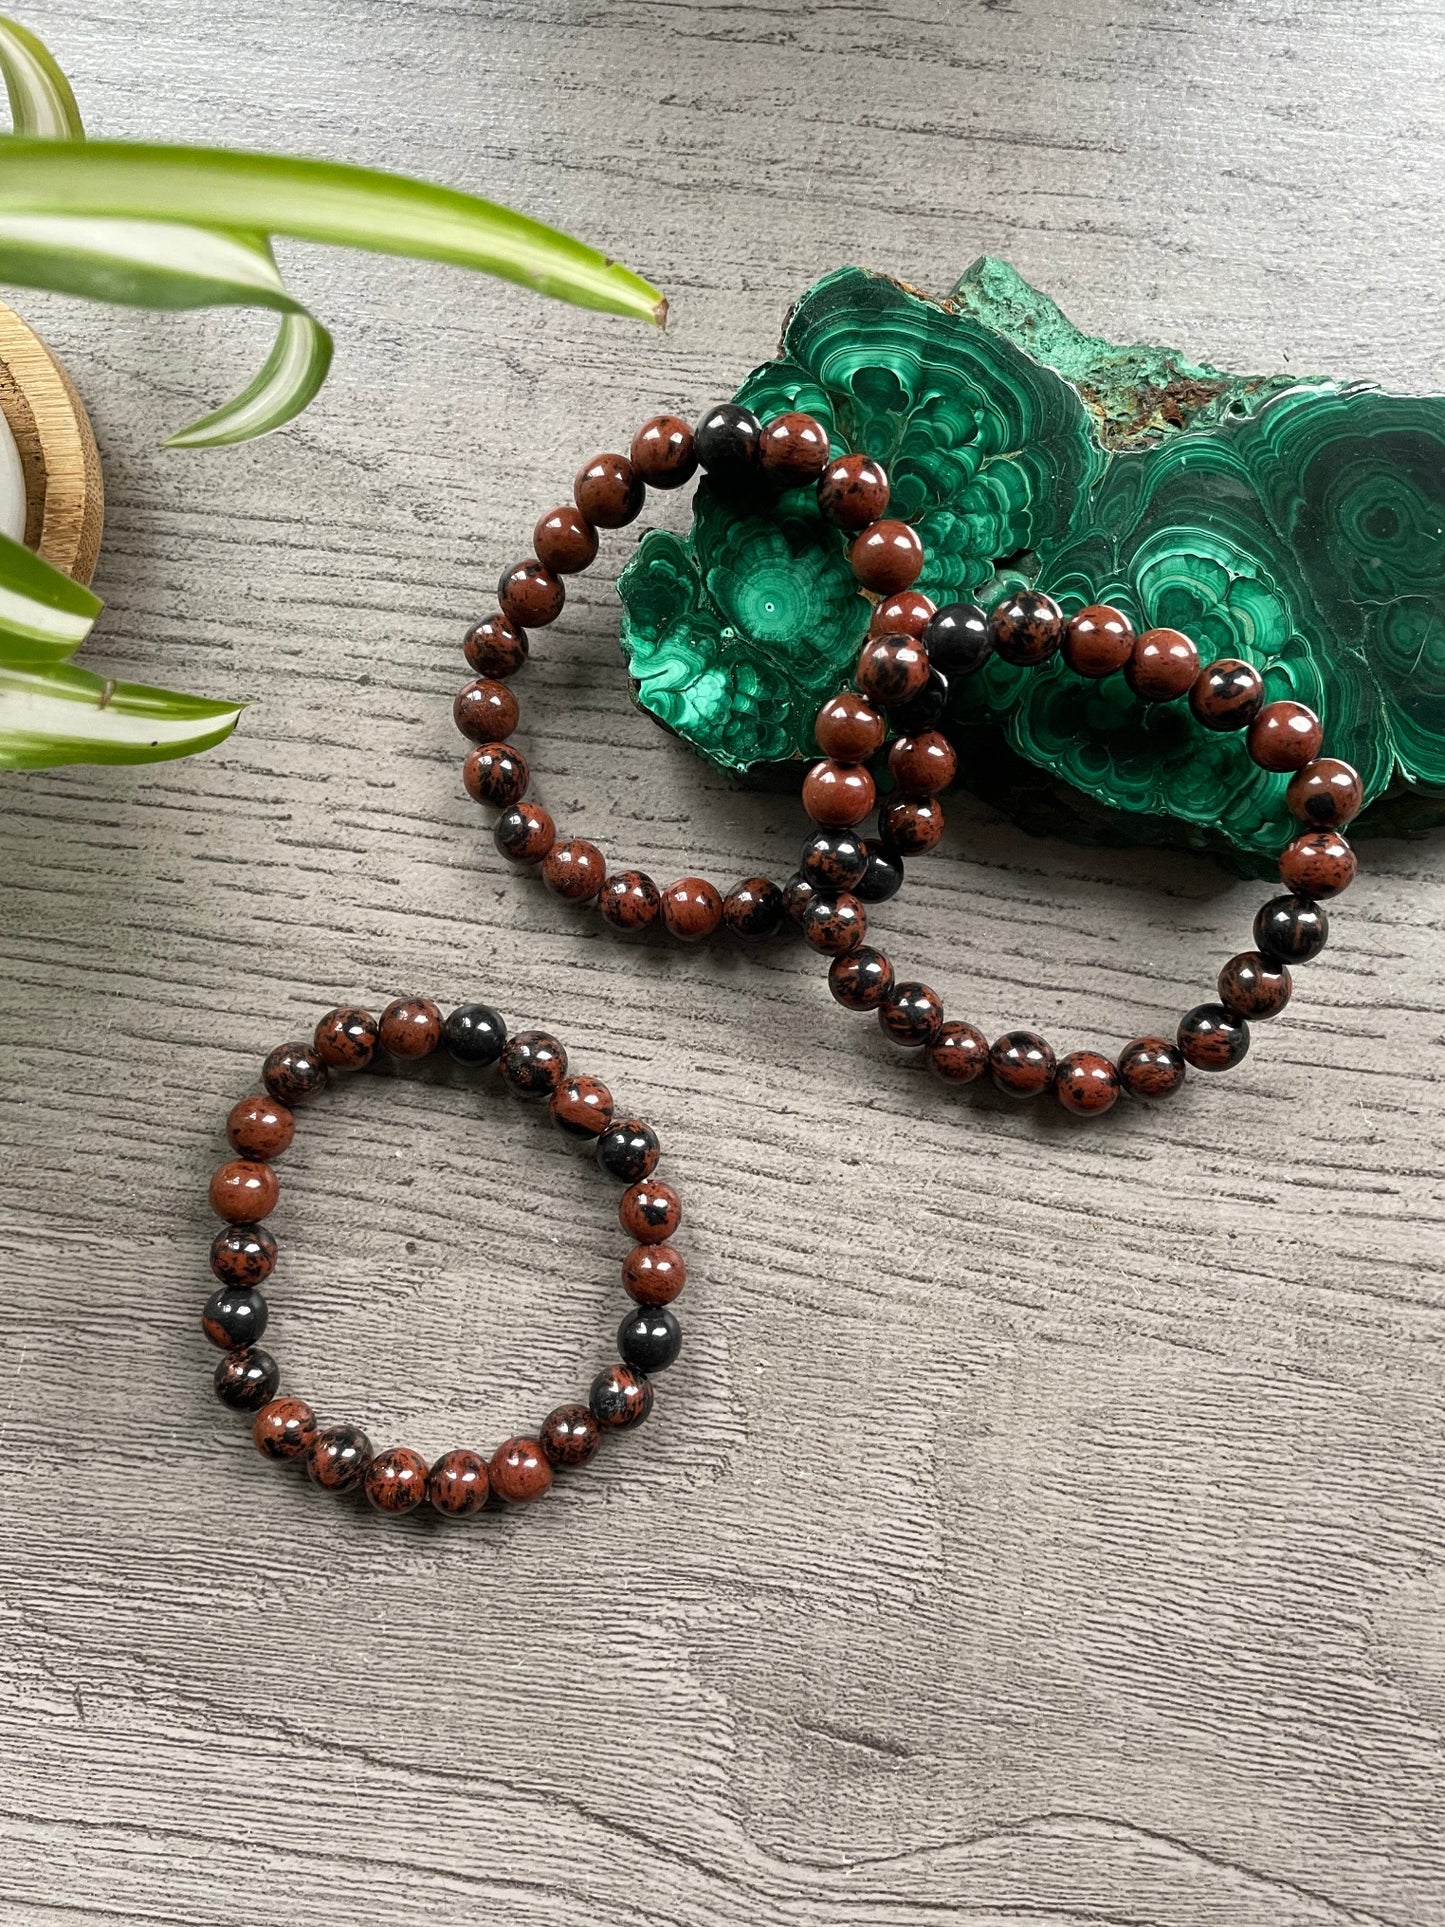 Pictured is a mahogany obsidian bead bracelet.